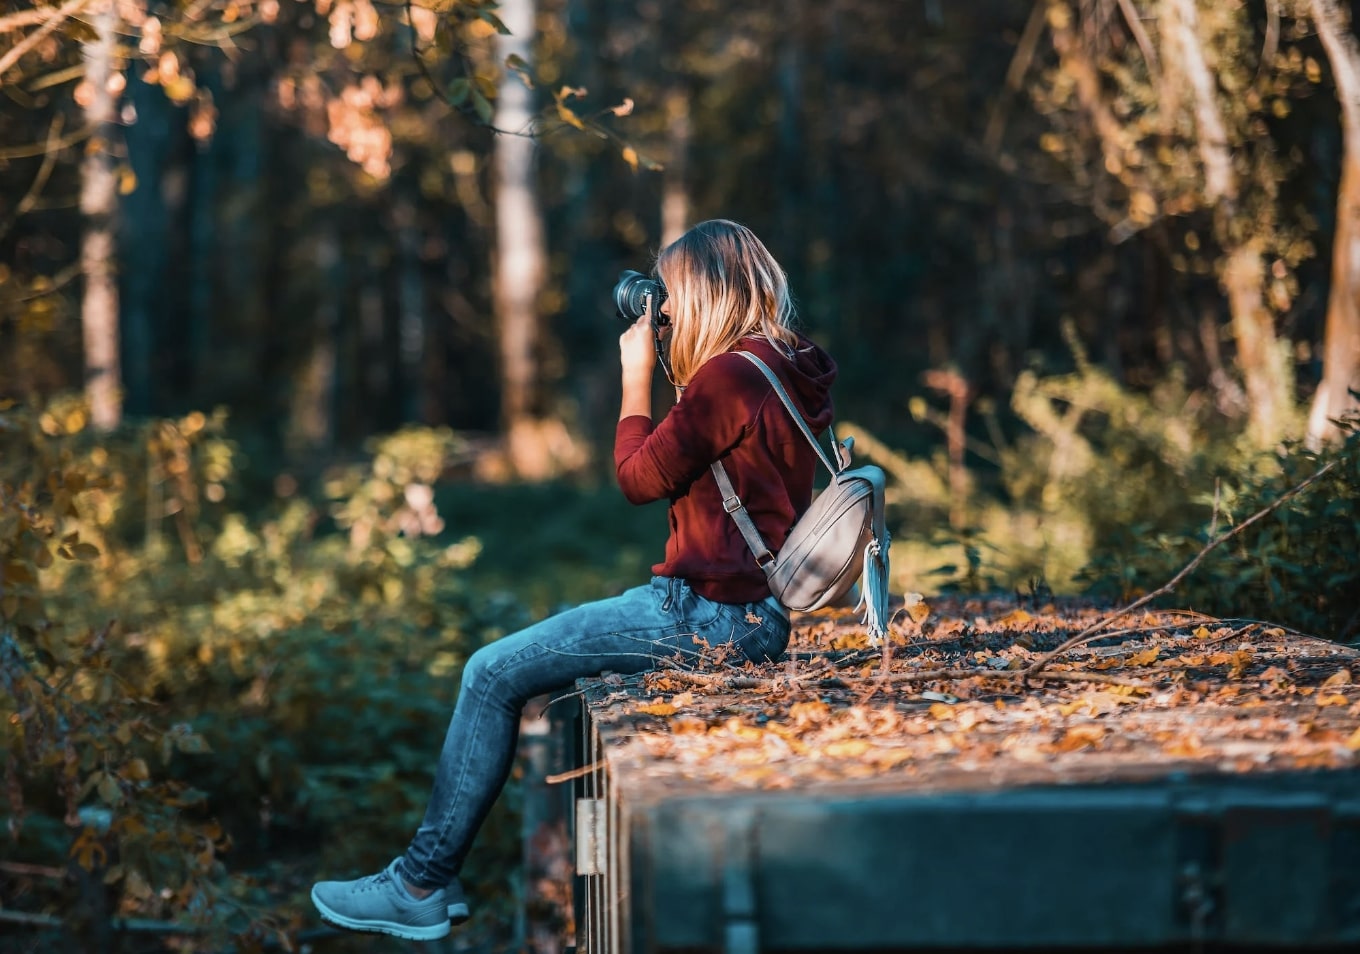 Girl Sitting Down Using Camera in Forest